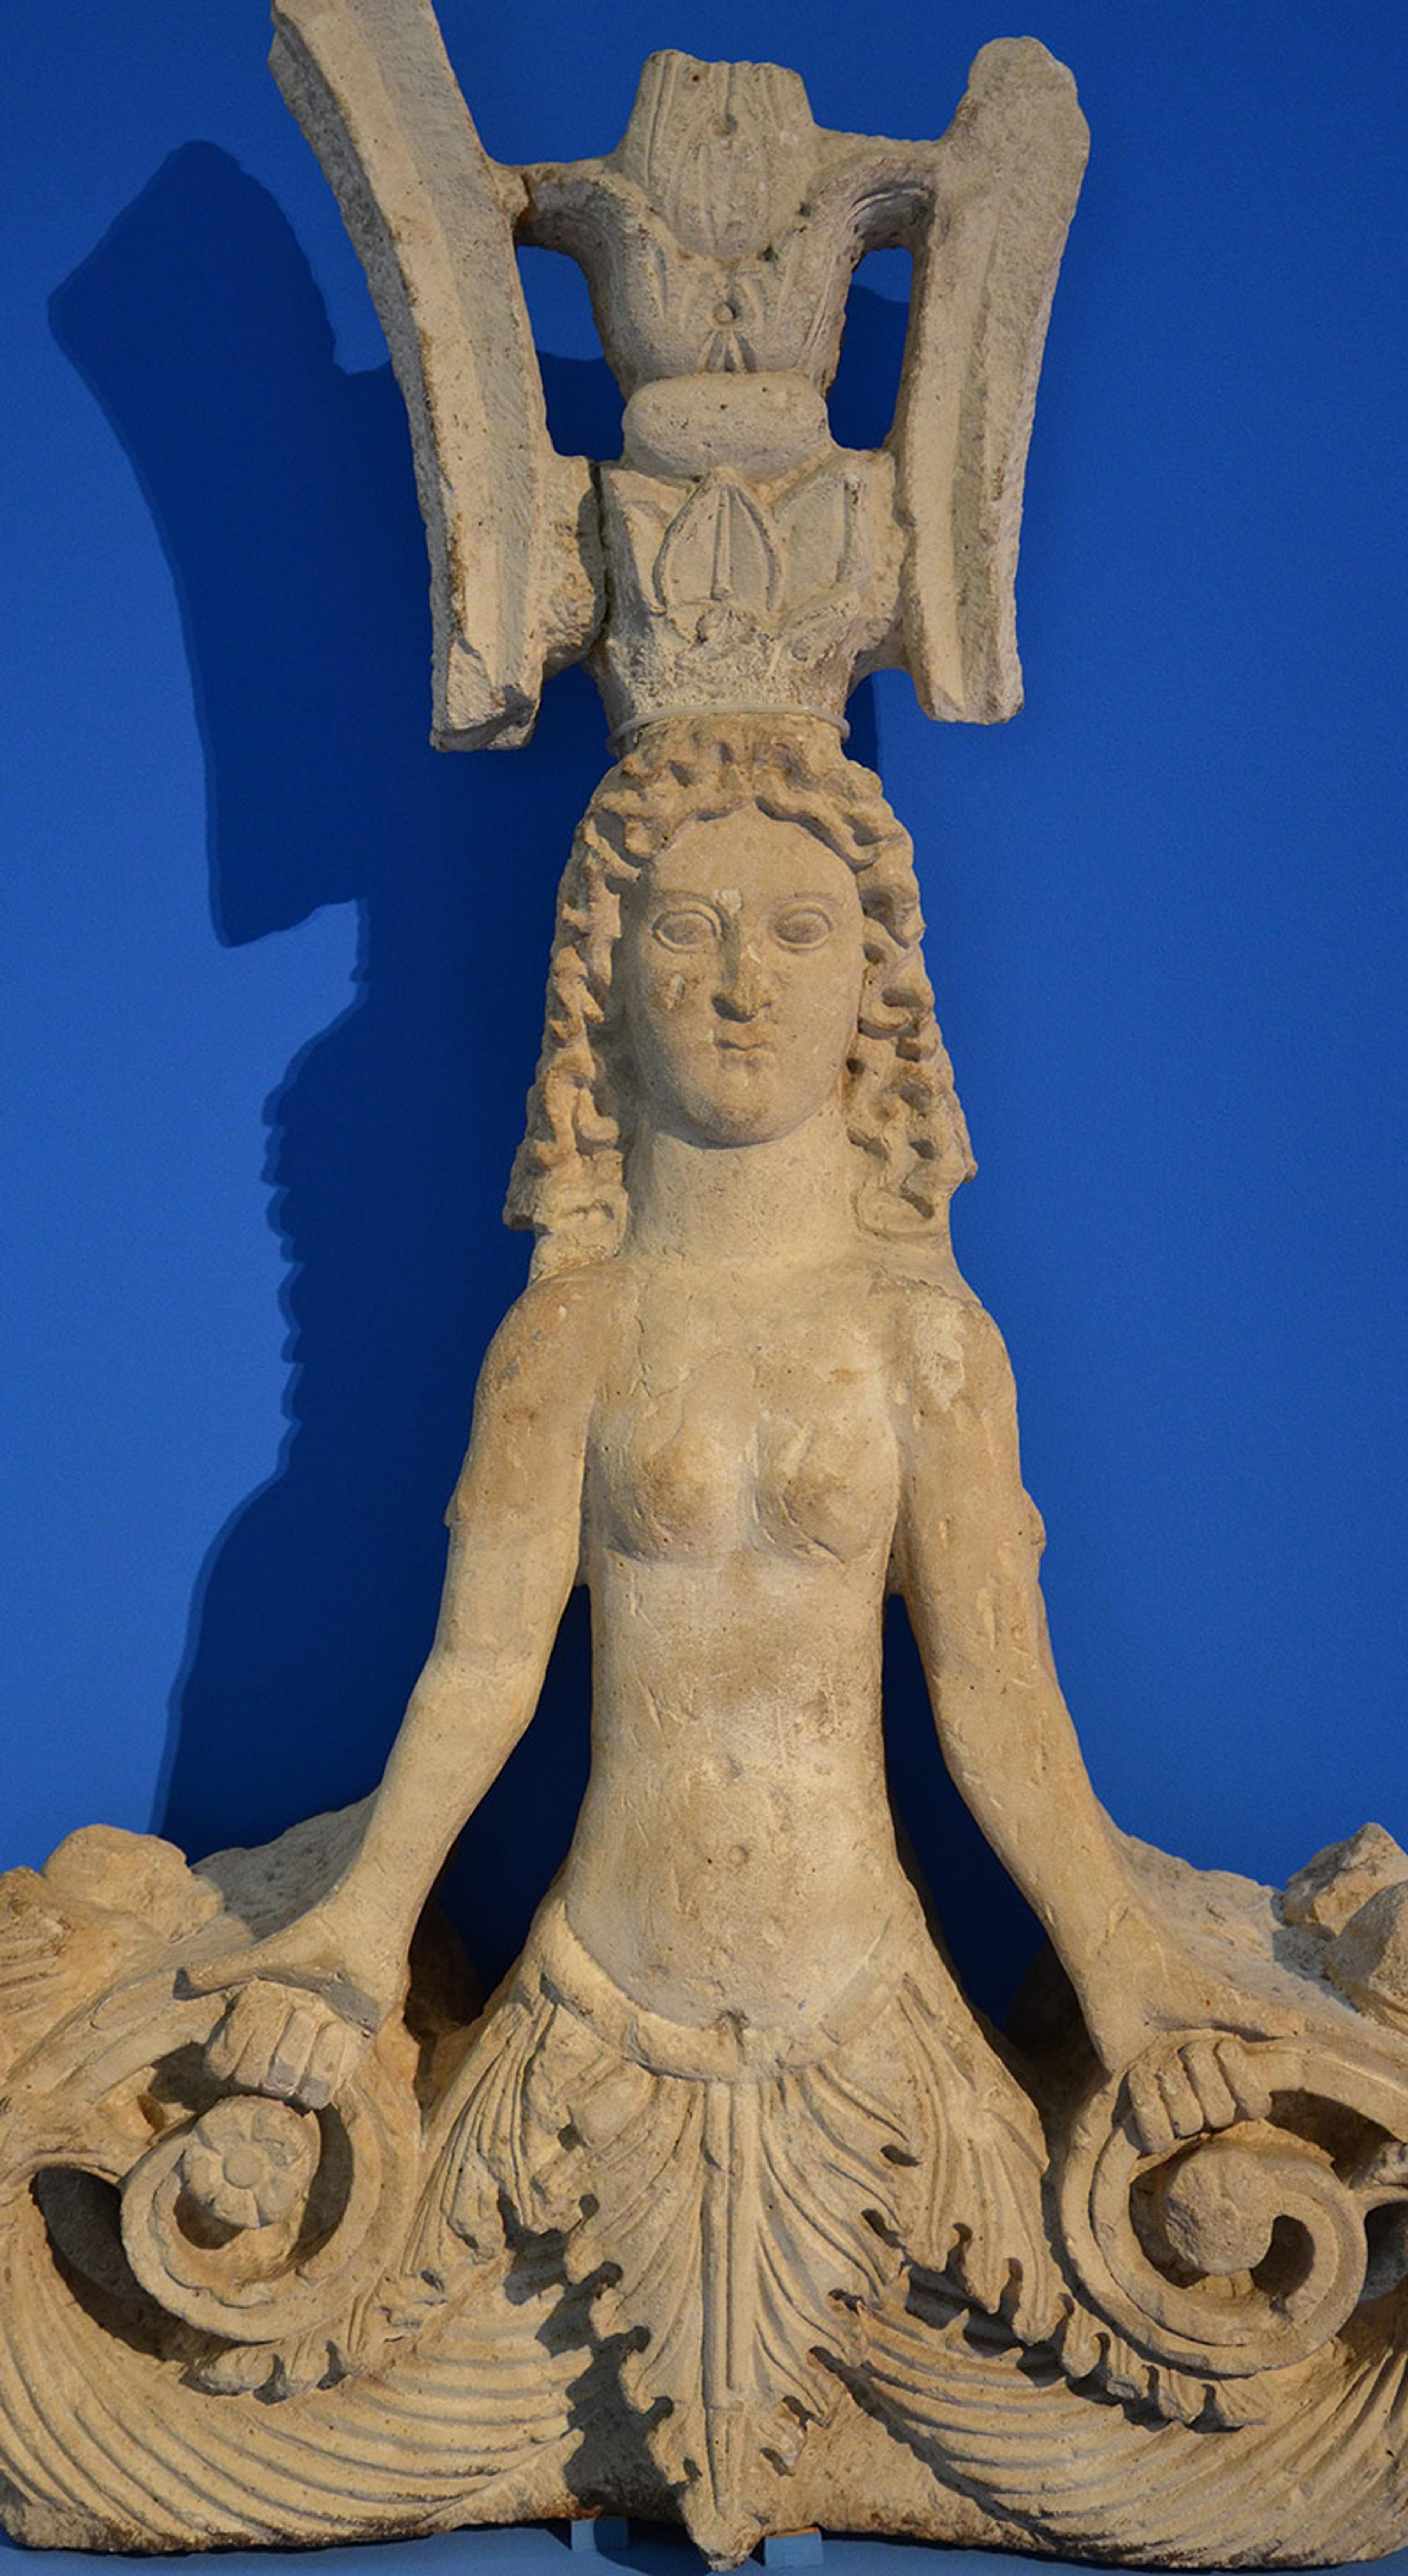 A snake goddess statue in stone. She is bare chested, faces forward and wears an elaborate headdress